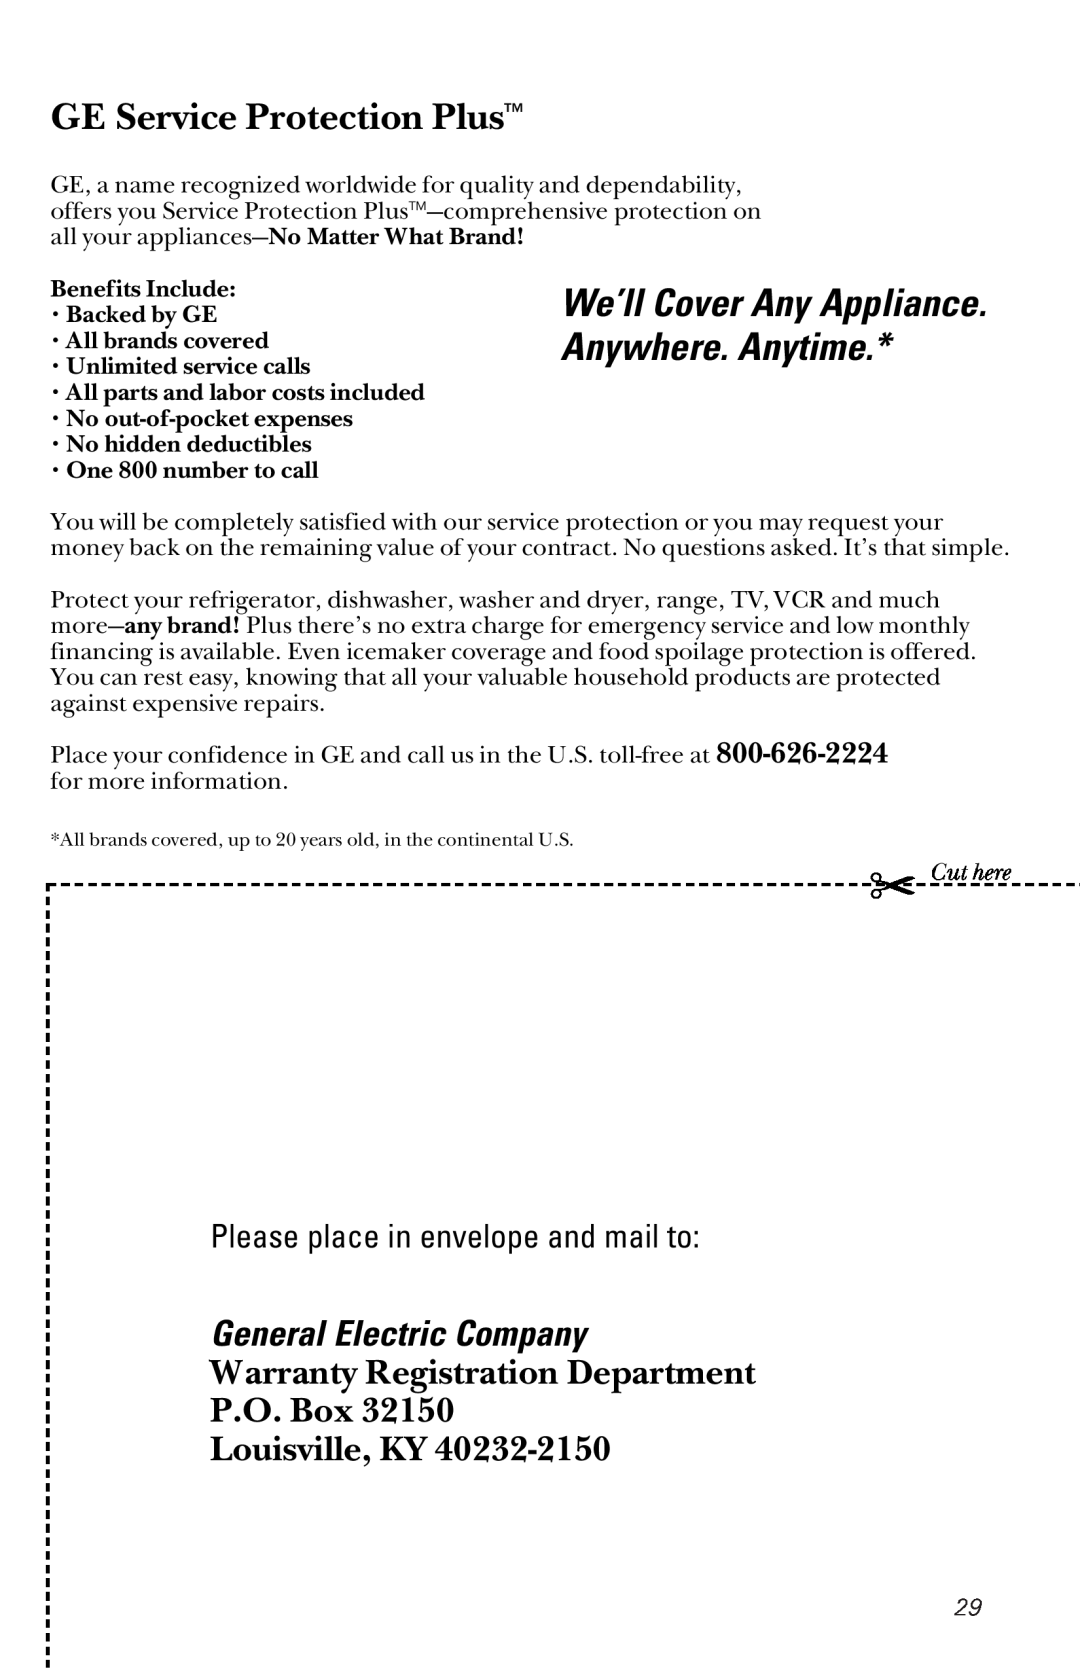 GE GSD5152 Cut here, GE Service Protection Plus, We’ll Cover Any Appliance. Anywhere. Anytime, General Electric Company 